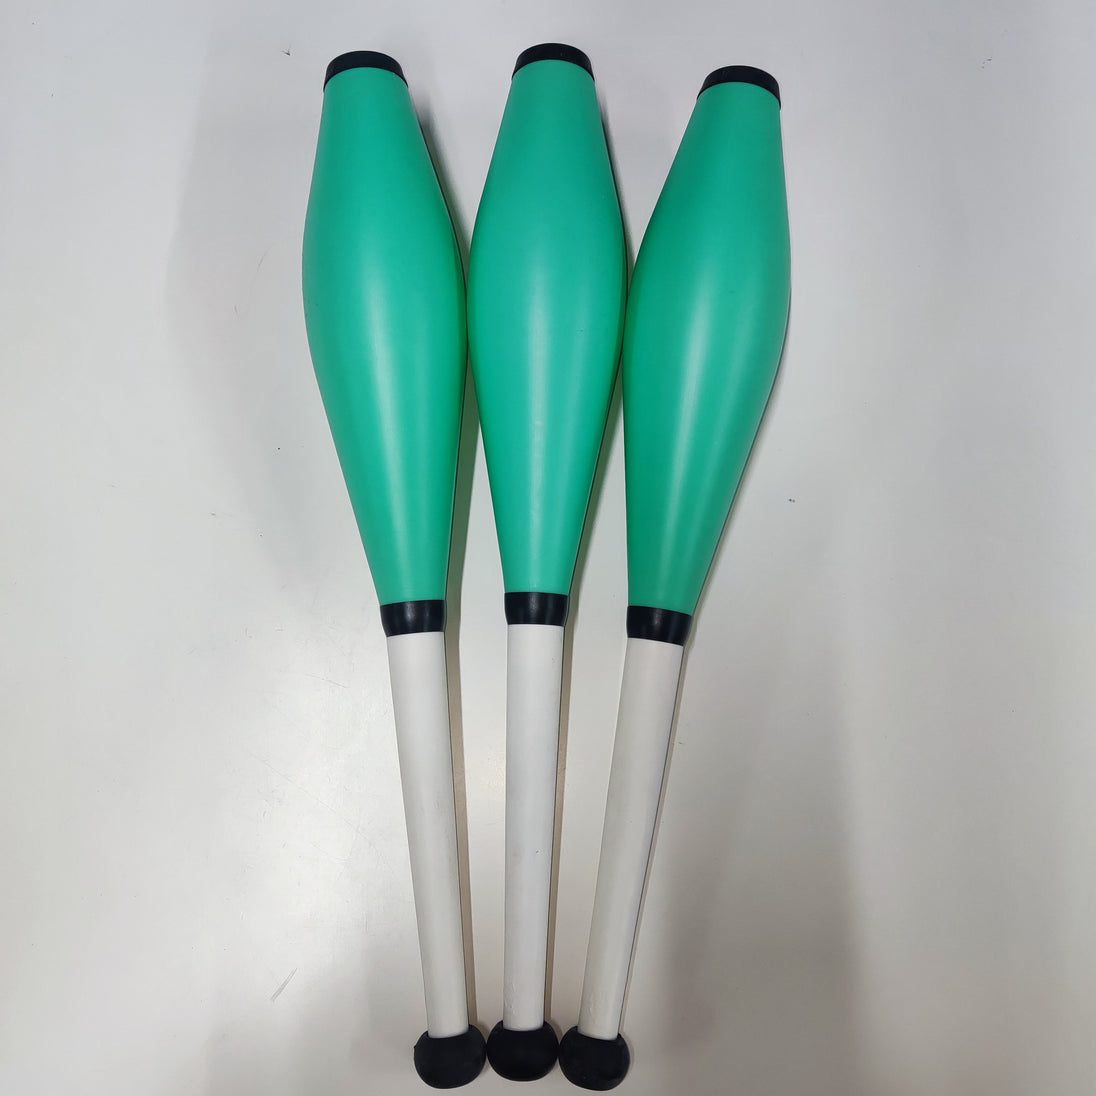  Play PX3 Quantum Juggling Club - SET OF 3 - Pastel Green with Black knobs  - Bargain basement 